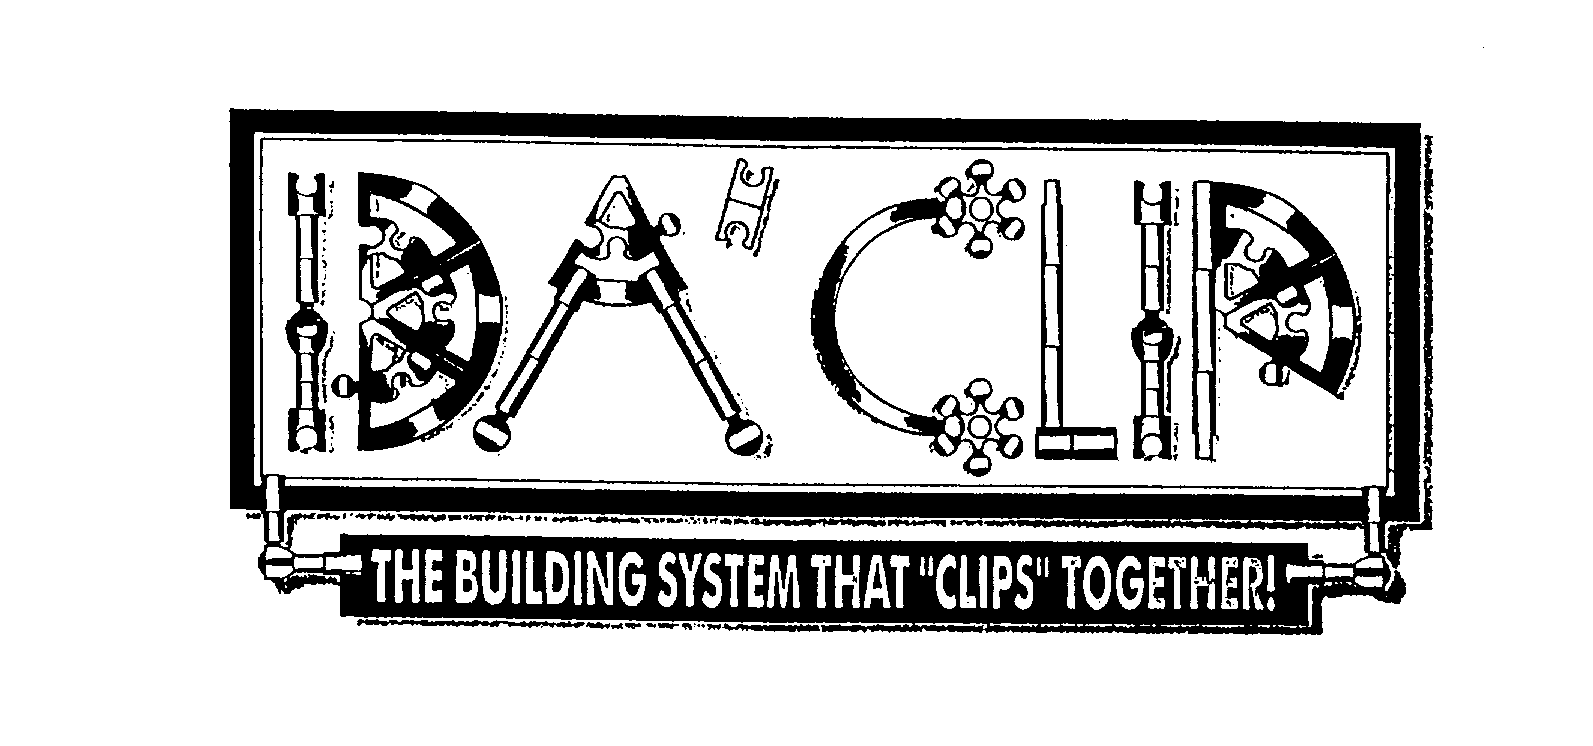  IDA CLIP THE BUILDING SYSTEM THAT "CLIPS" TOGETHER!